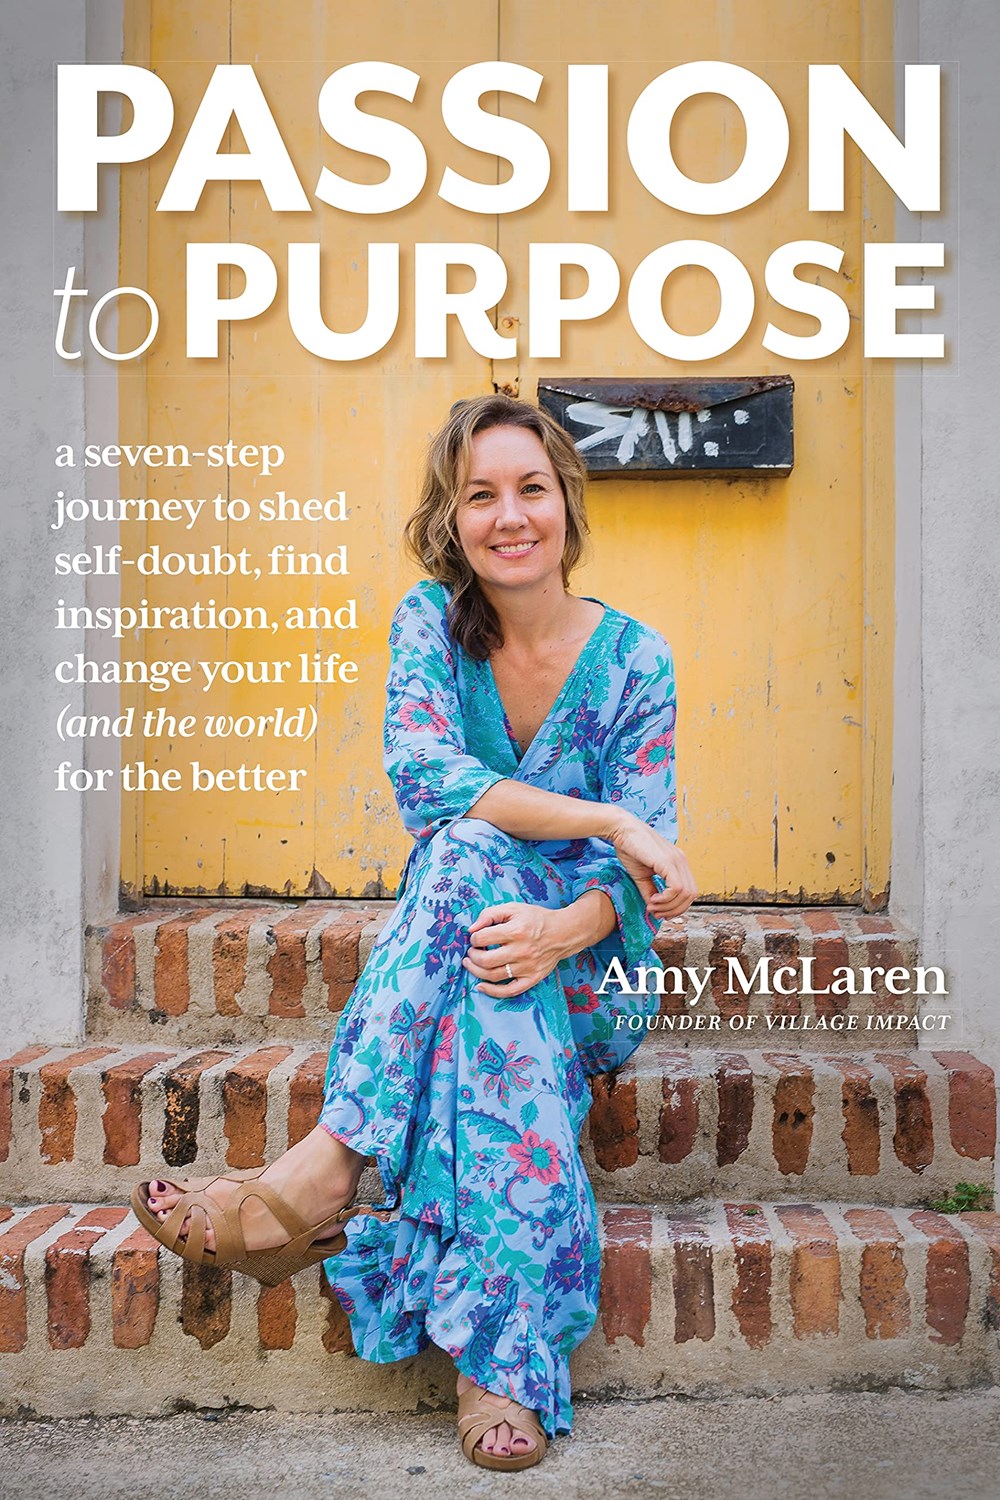 Passion to Purpose A Seven-Step Journey to Shed Self-Doubt, Find Inspiration, and Change Your Life (